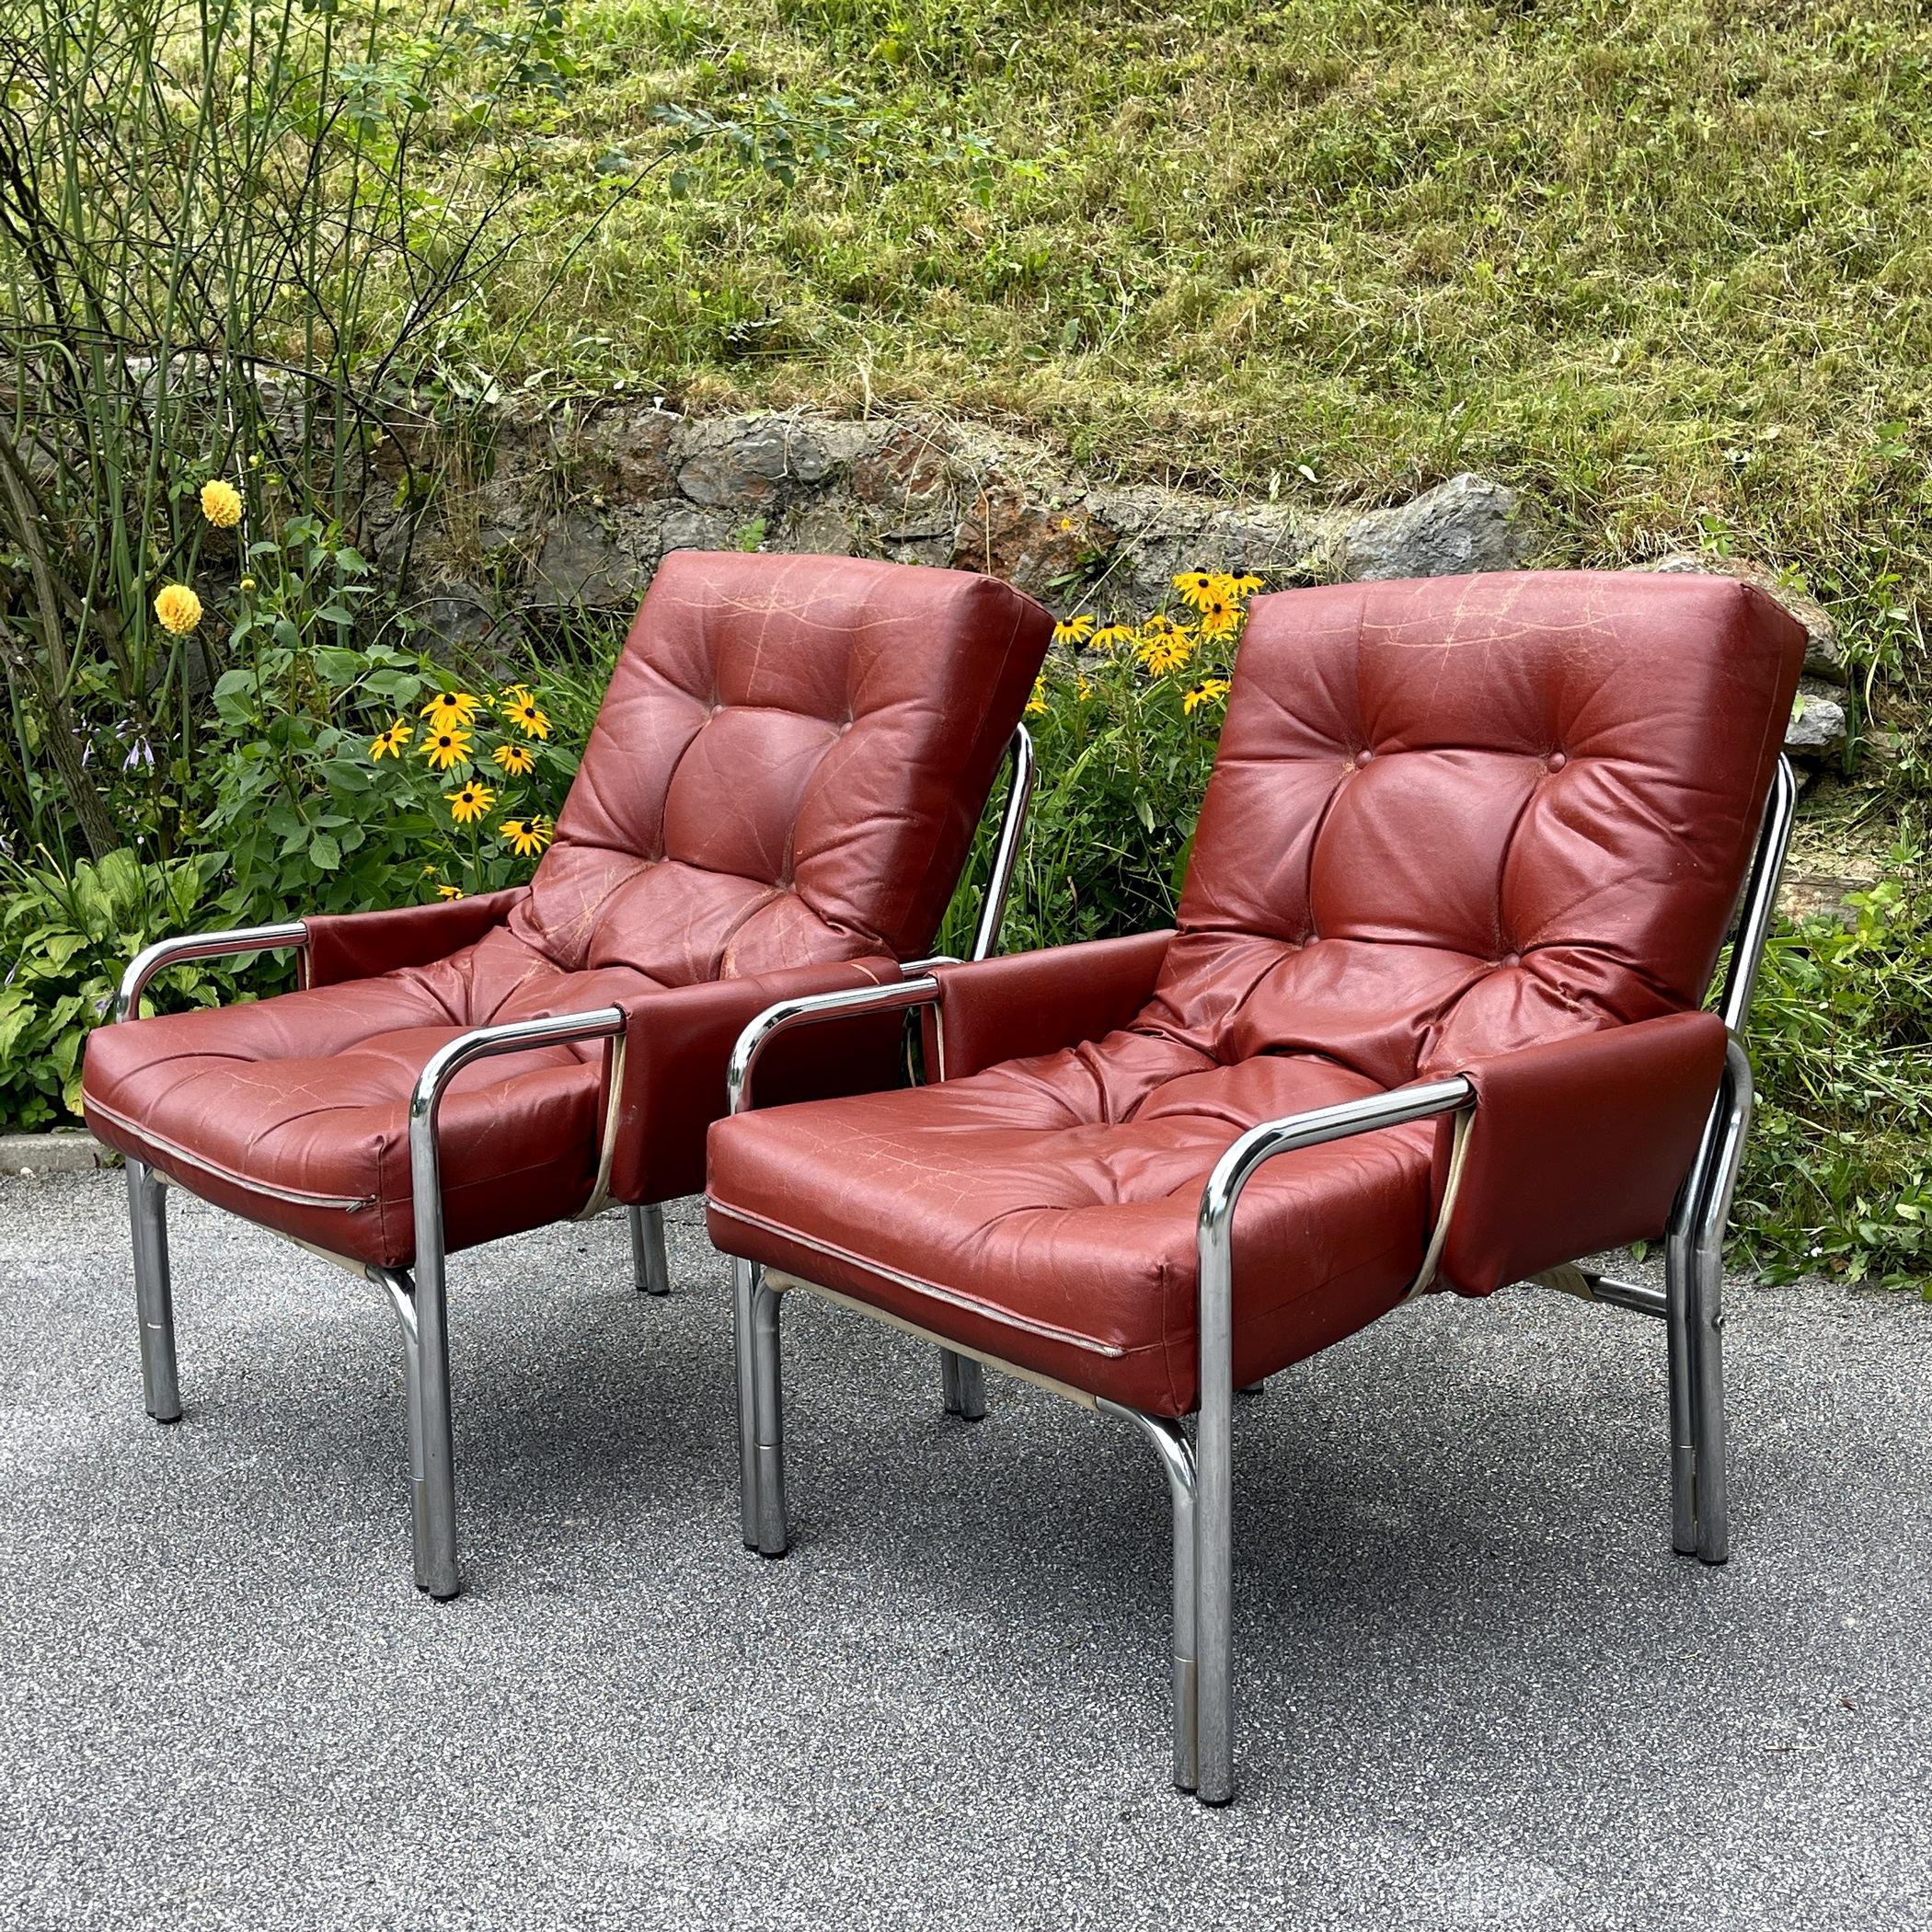 The rare, extremely comfortable pair of chairs made in Italy in the 1970s. Italian industrial production. It will meet all your needs - relaxing, reading a book with a cup of coffee, or watching your favorite movie. The armchair will perfectly fit